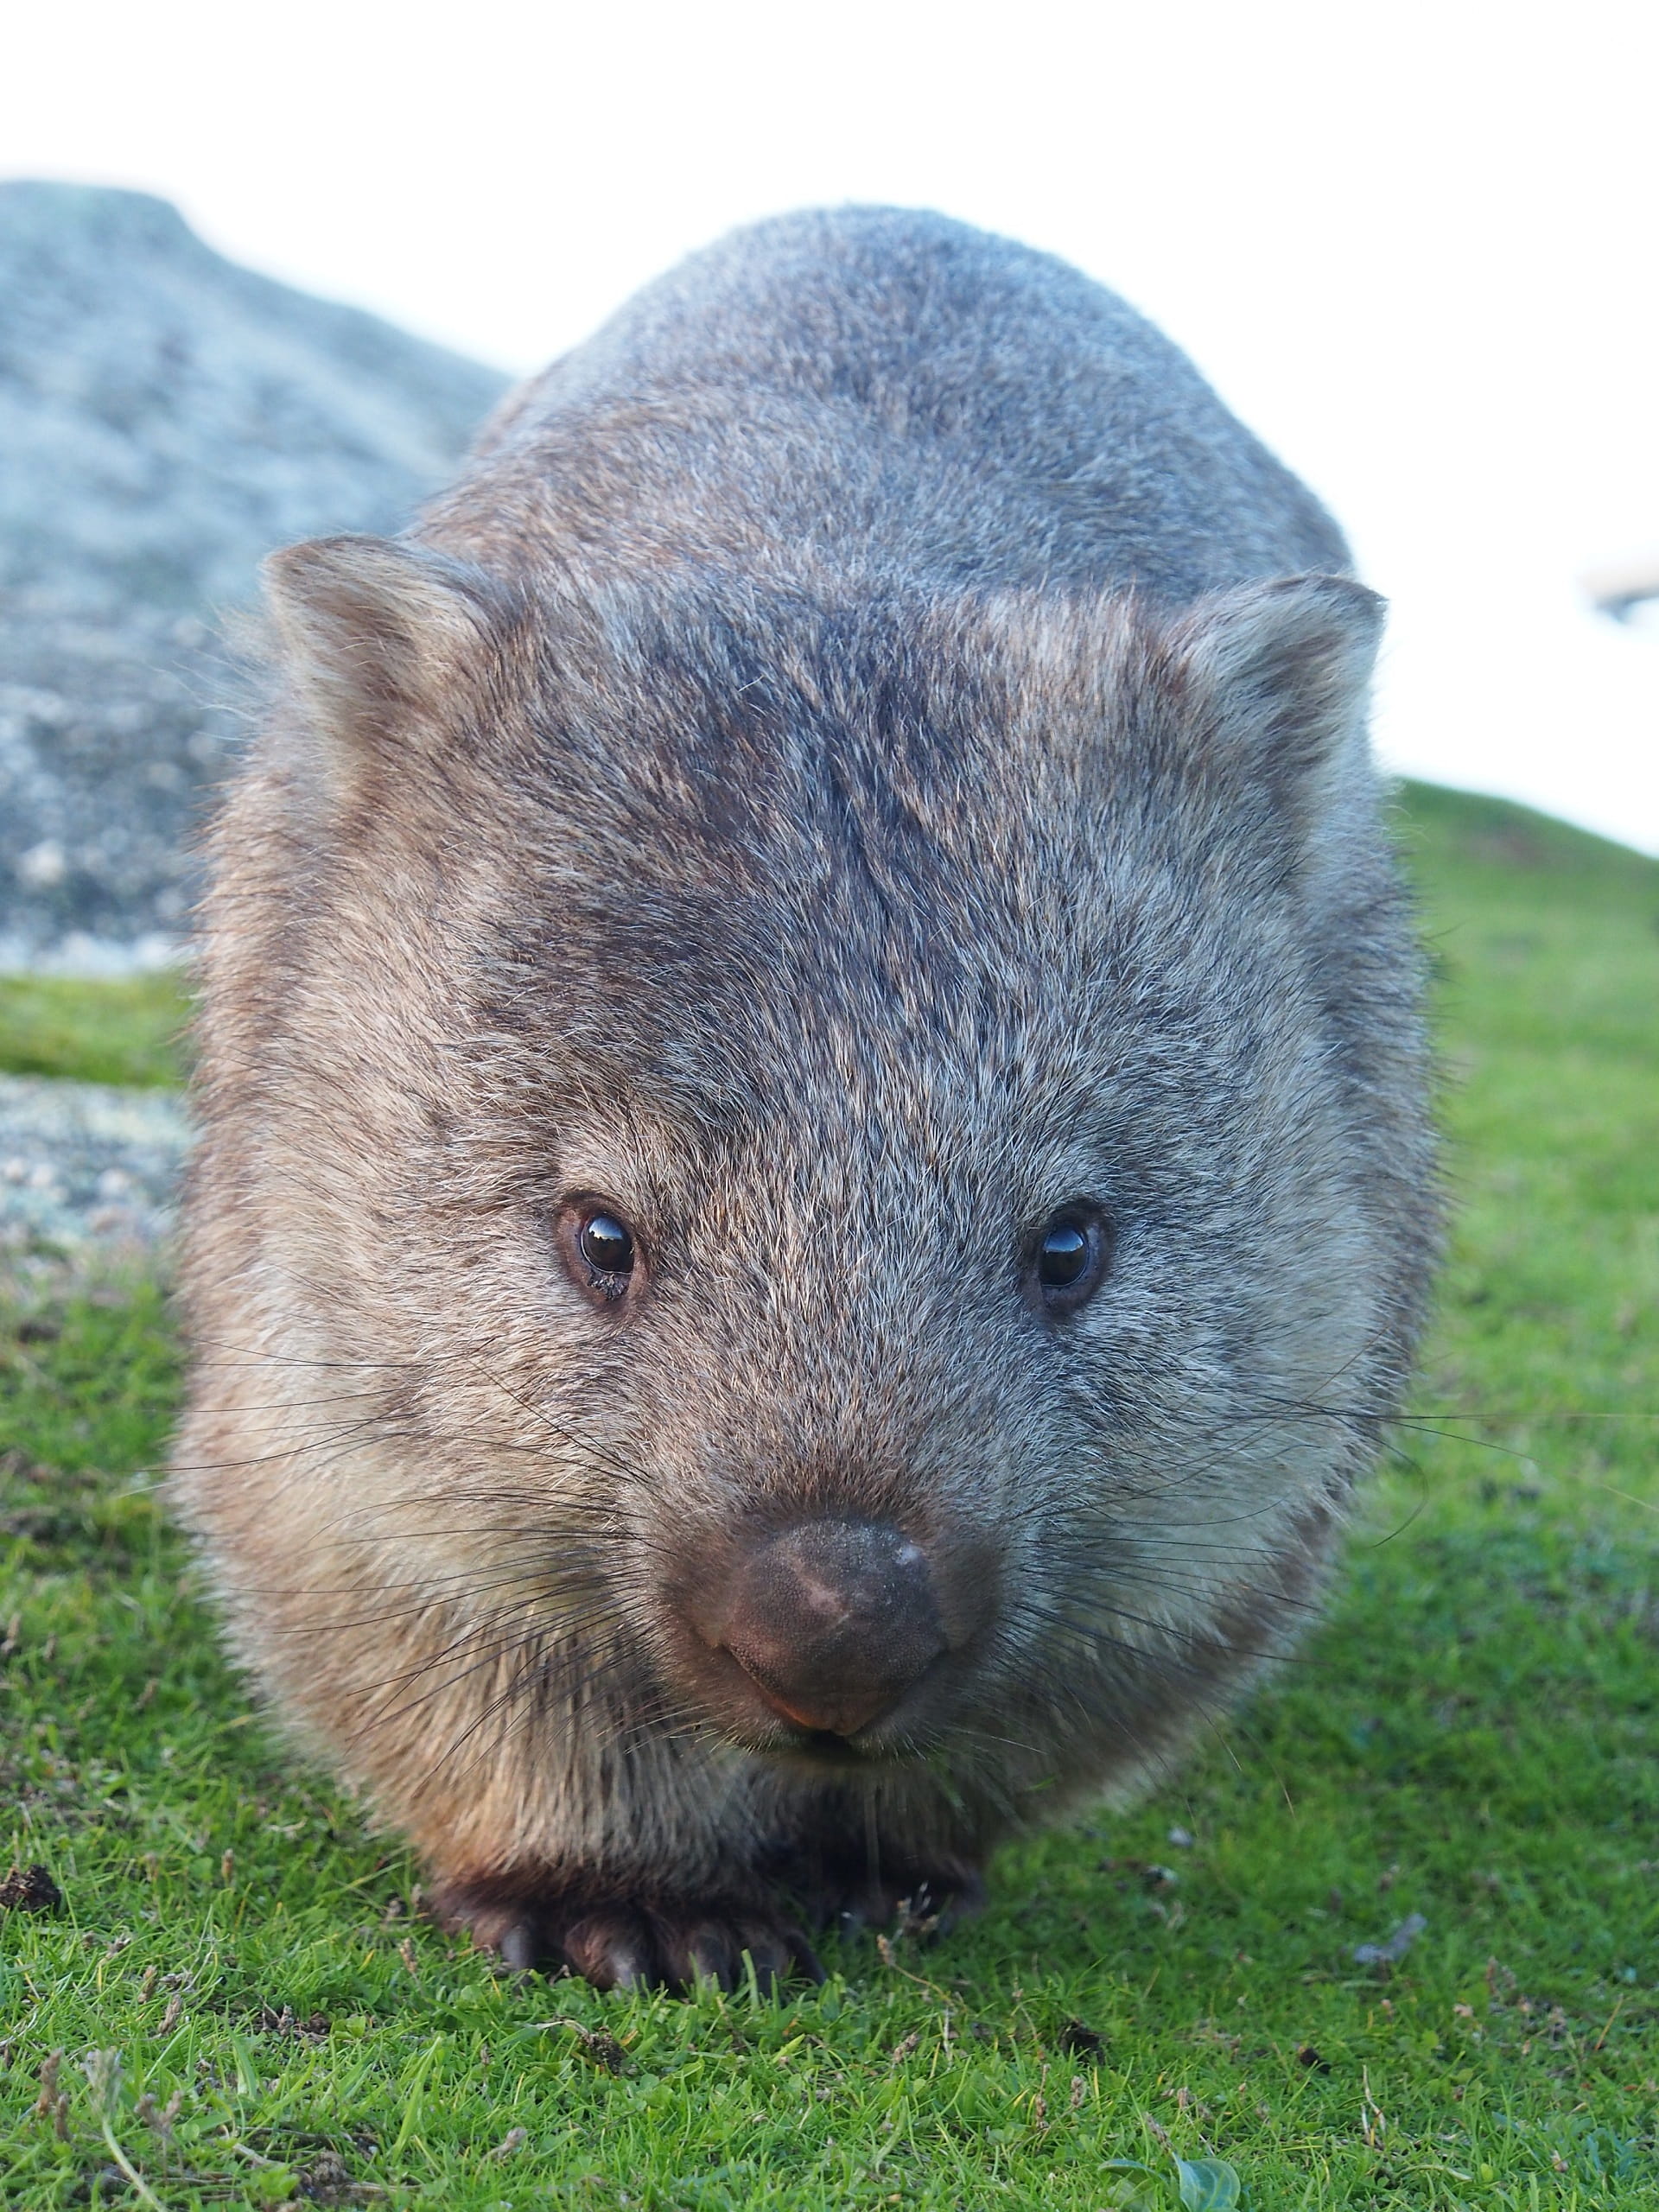 A common wombat walks towards the camera at Wilsons Promontory National Park.